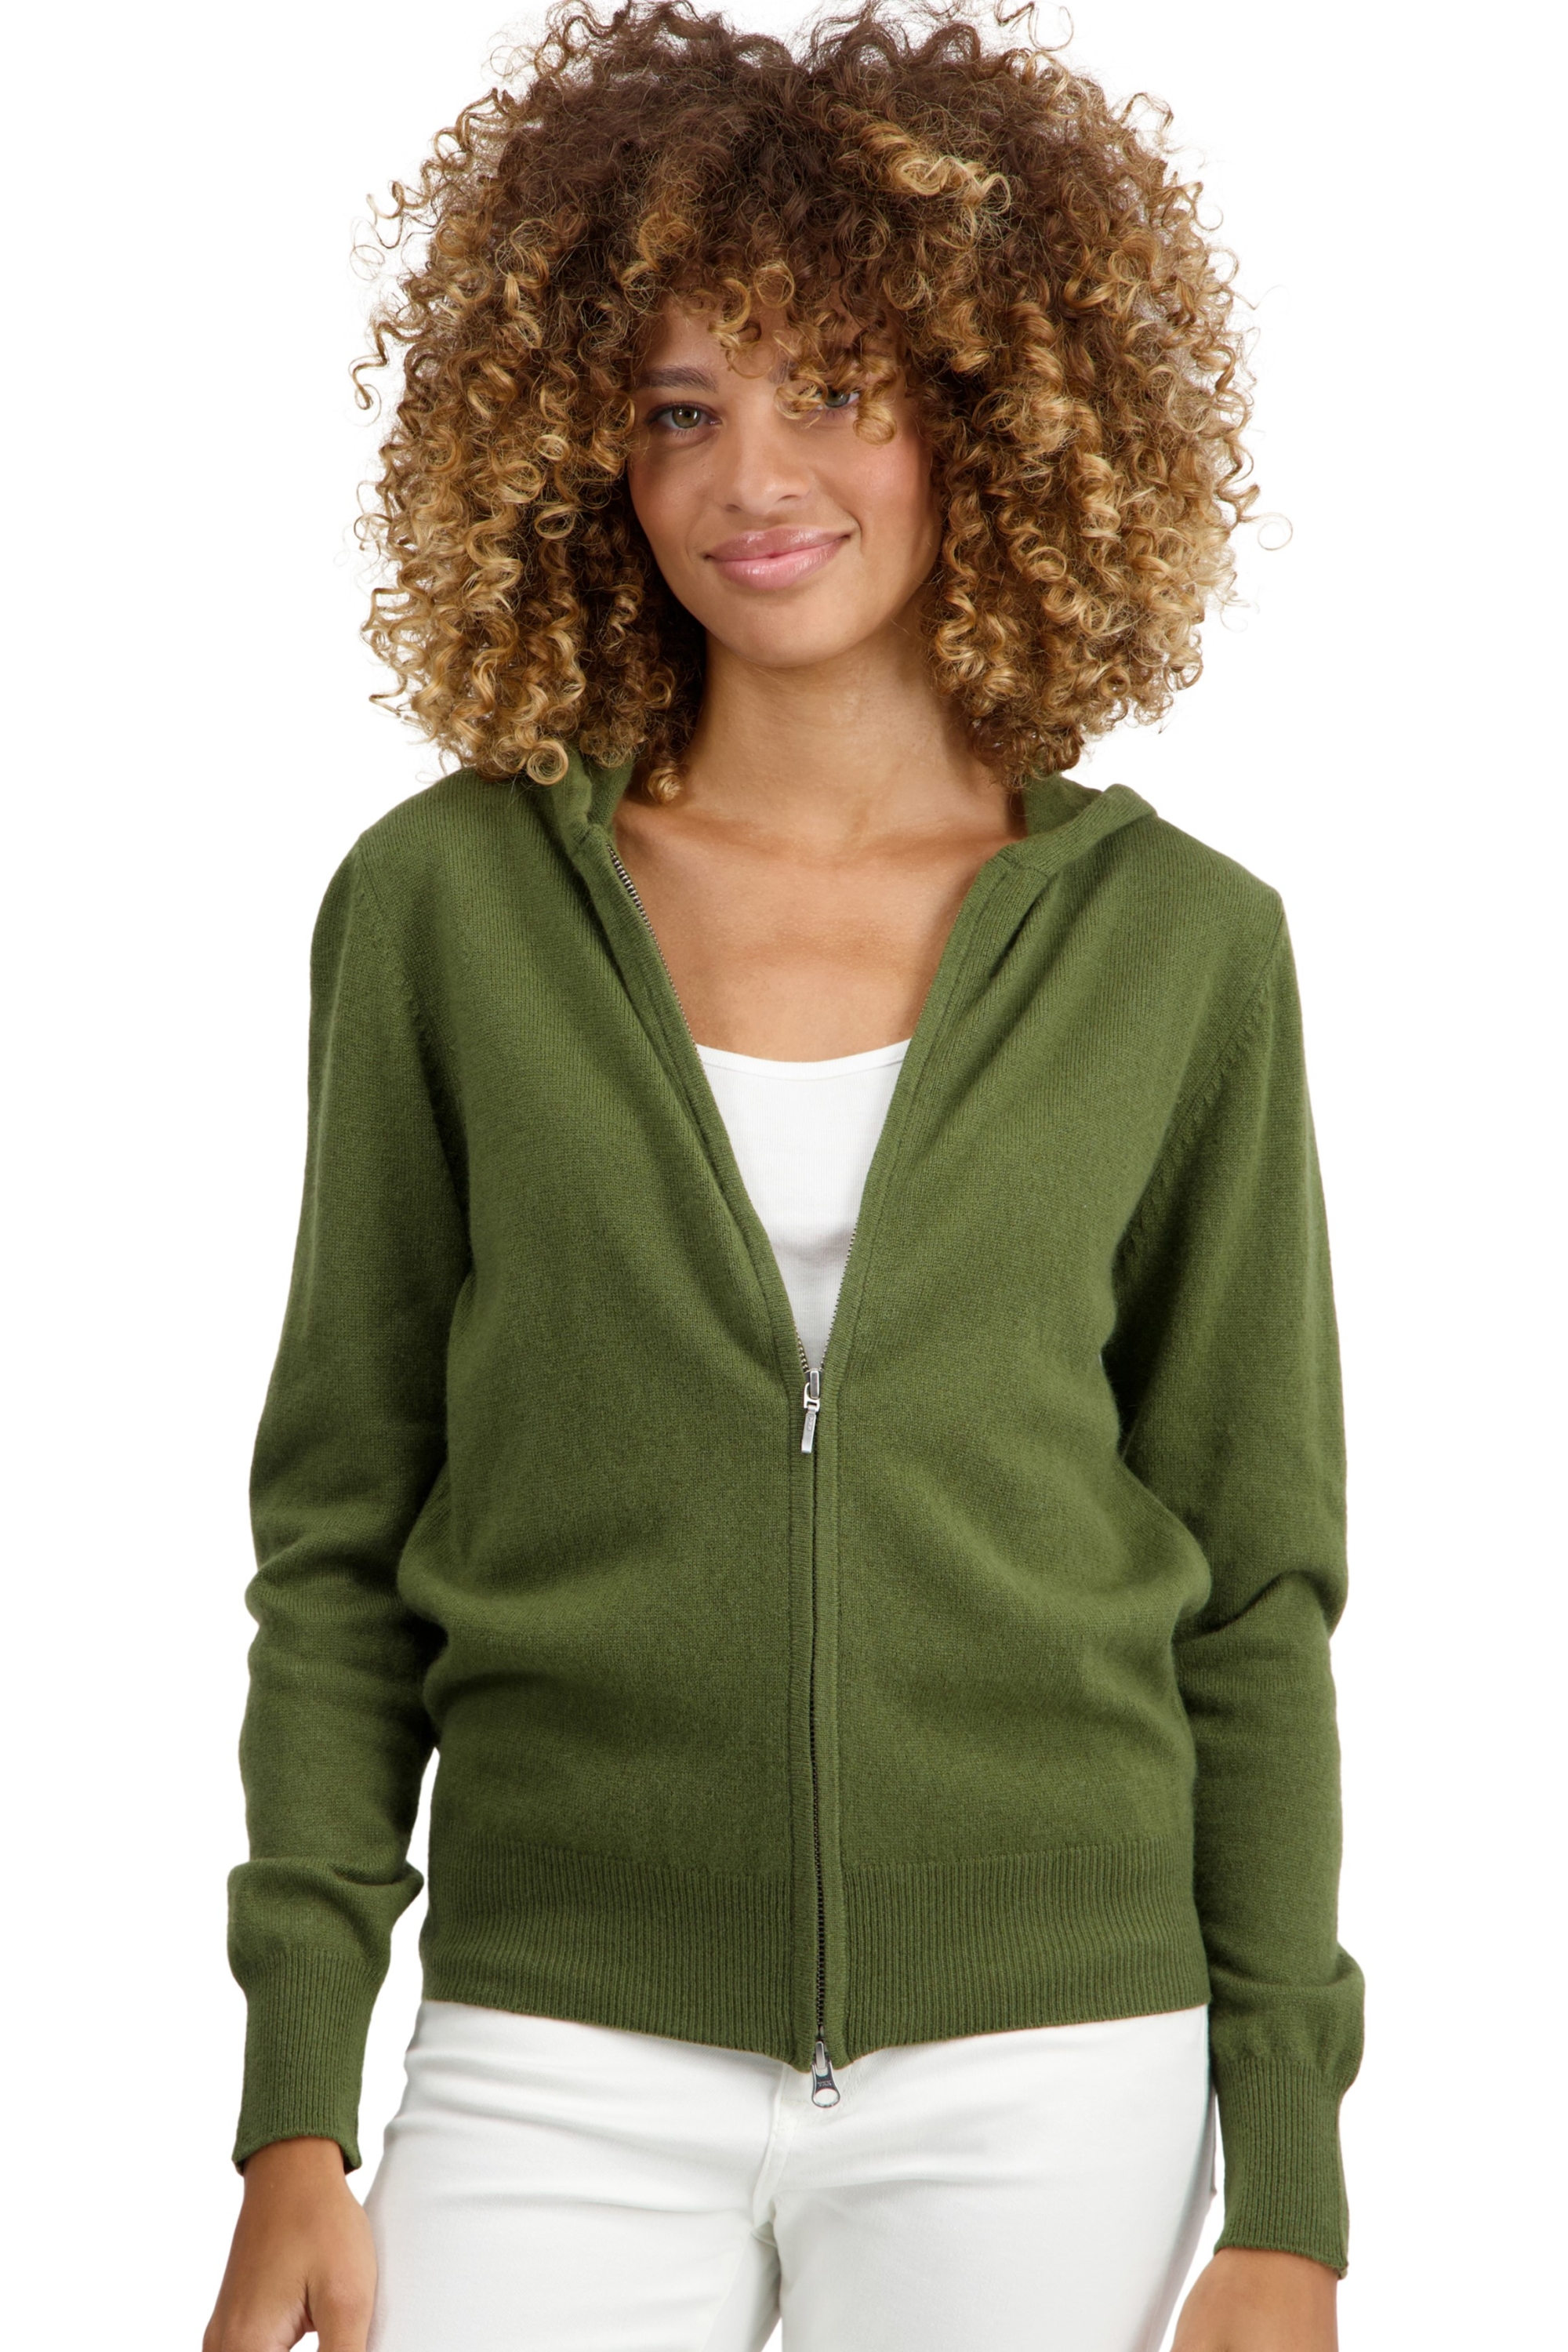 Cashmere ladies basic sweaters at low prices tina first olive s